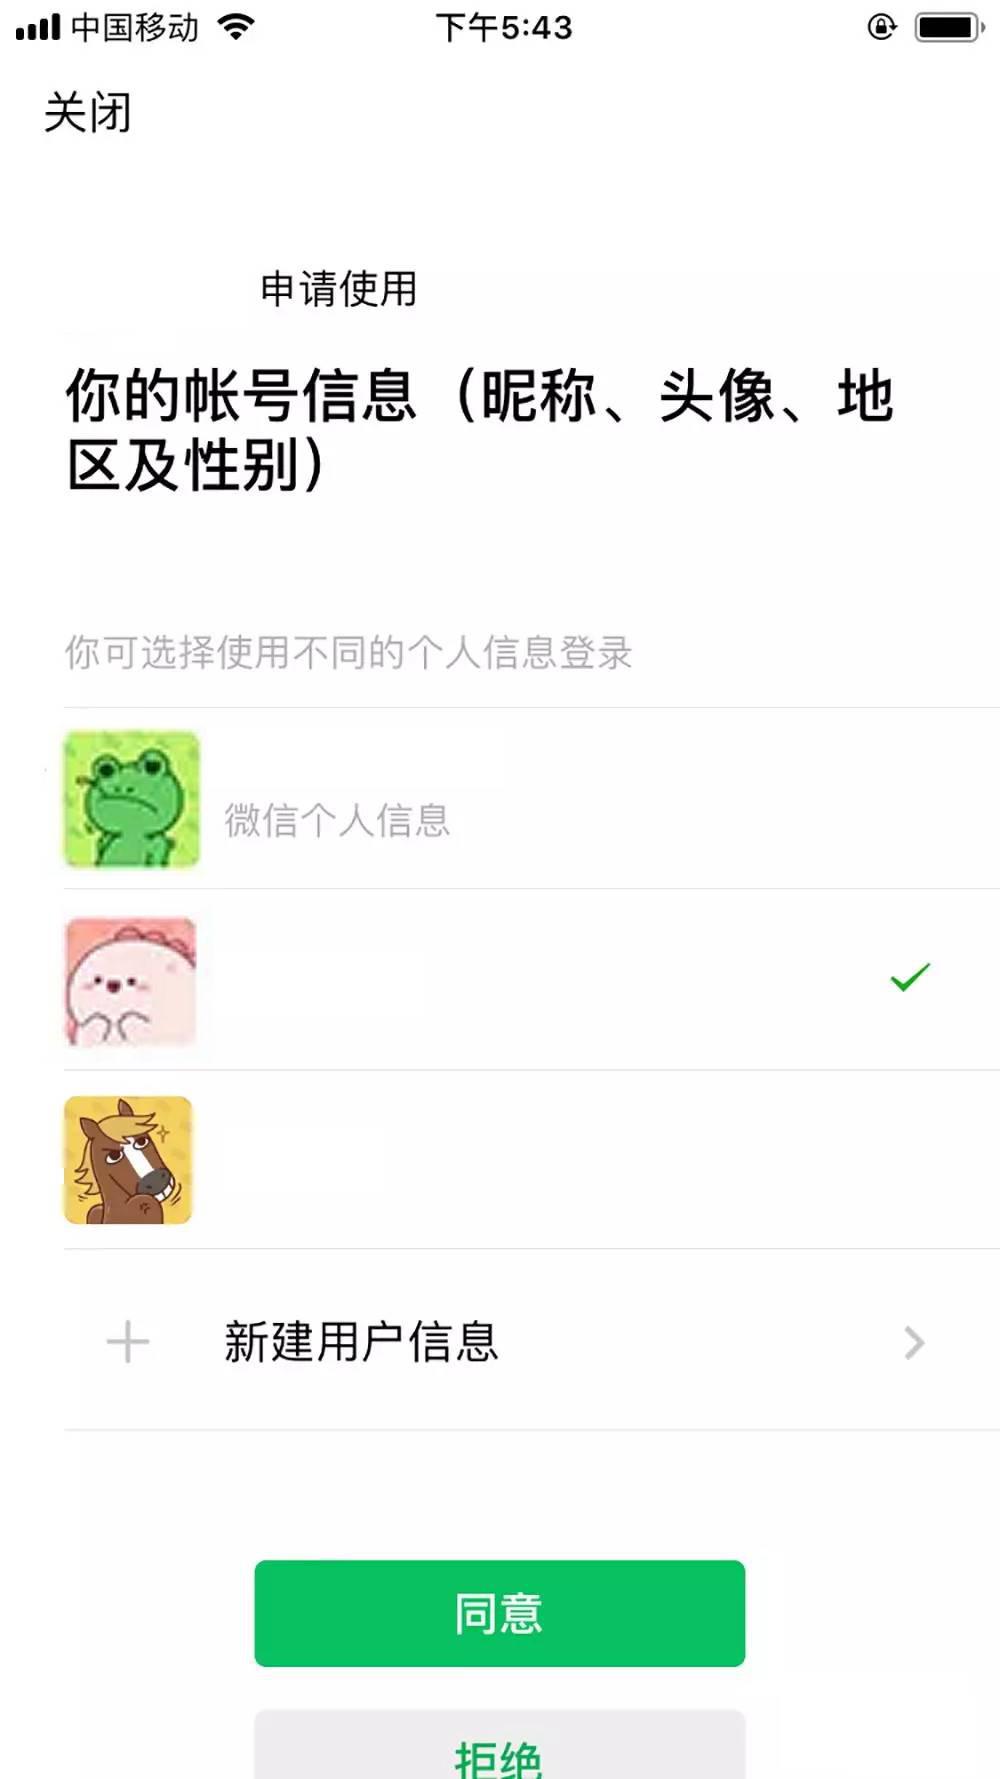 iOS 13 新功能 Sign in with Apple 有什么用，工作原理是什么？插图5